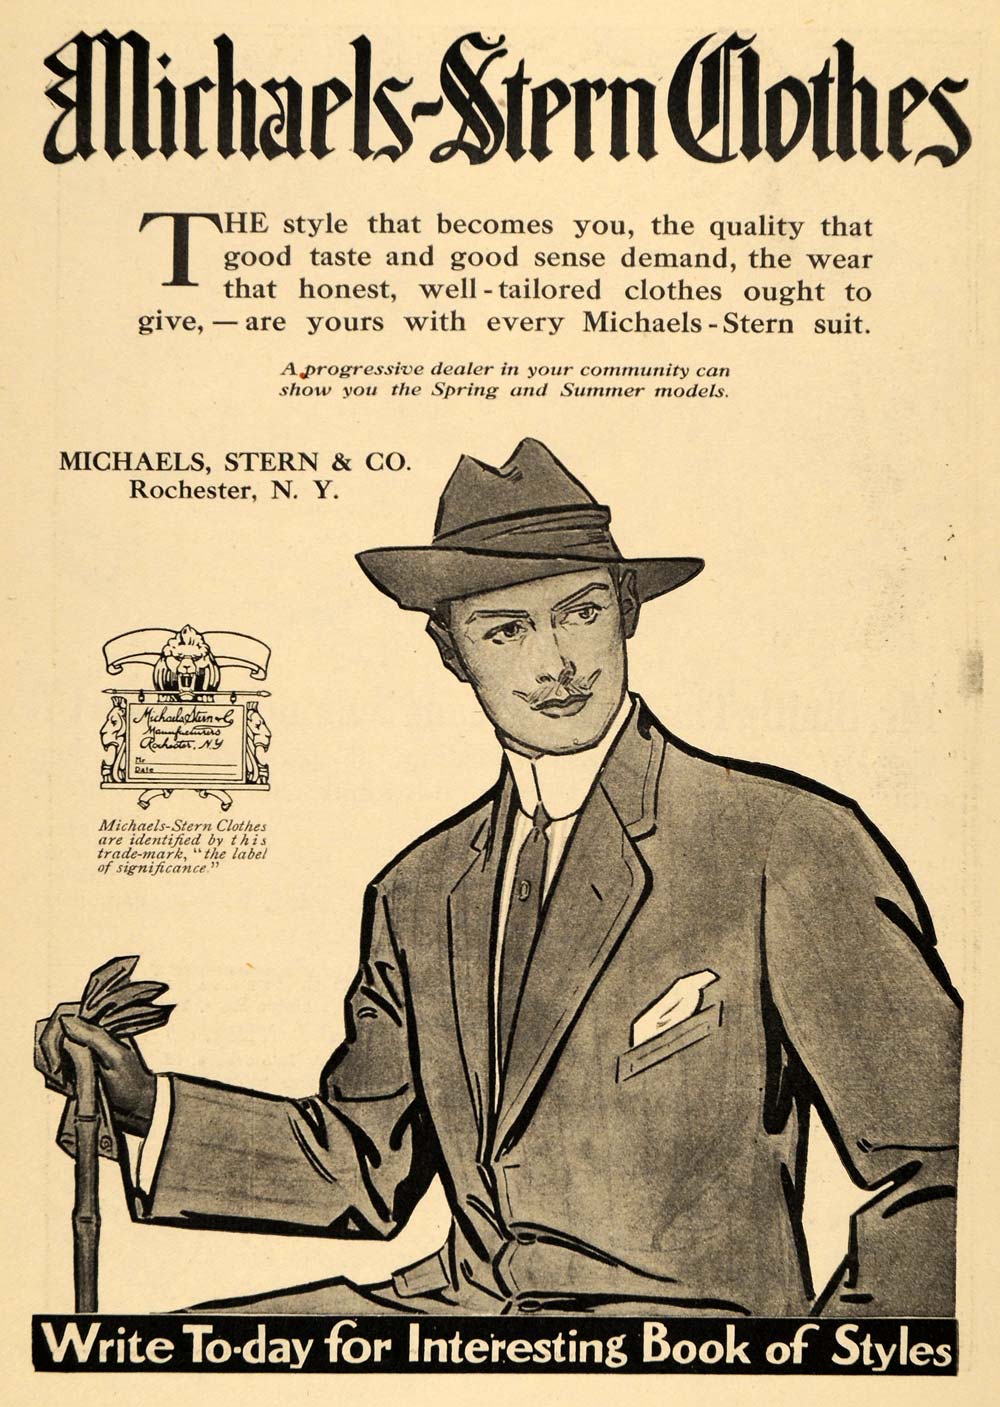 1911 Ad Michaels Stern Company Suit Tailored Clothes - ORIGINAL ADVERTISING EM1